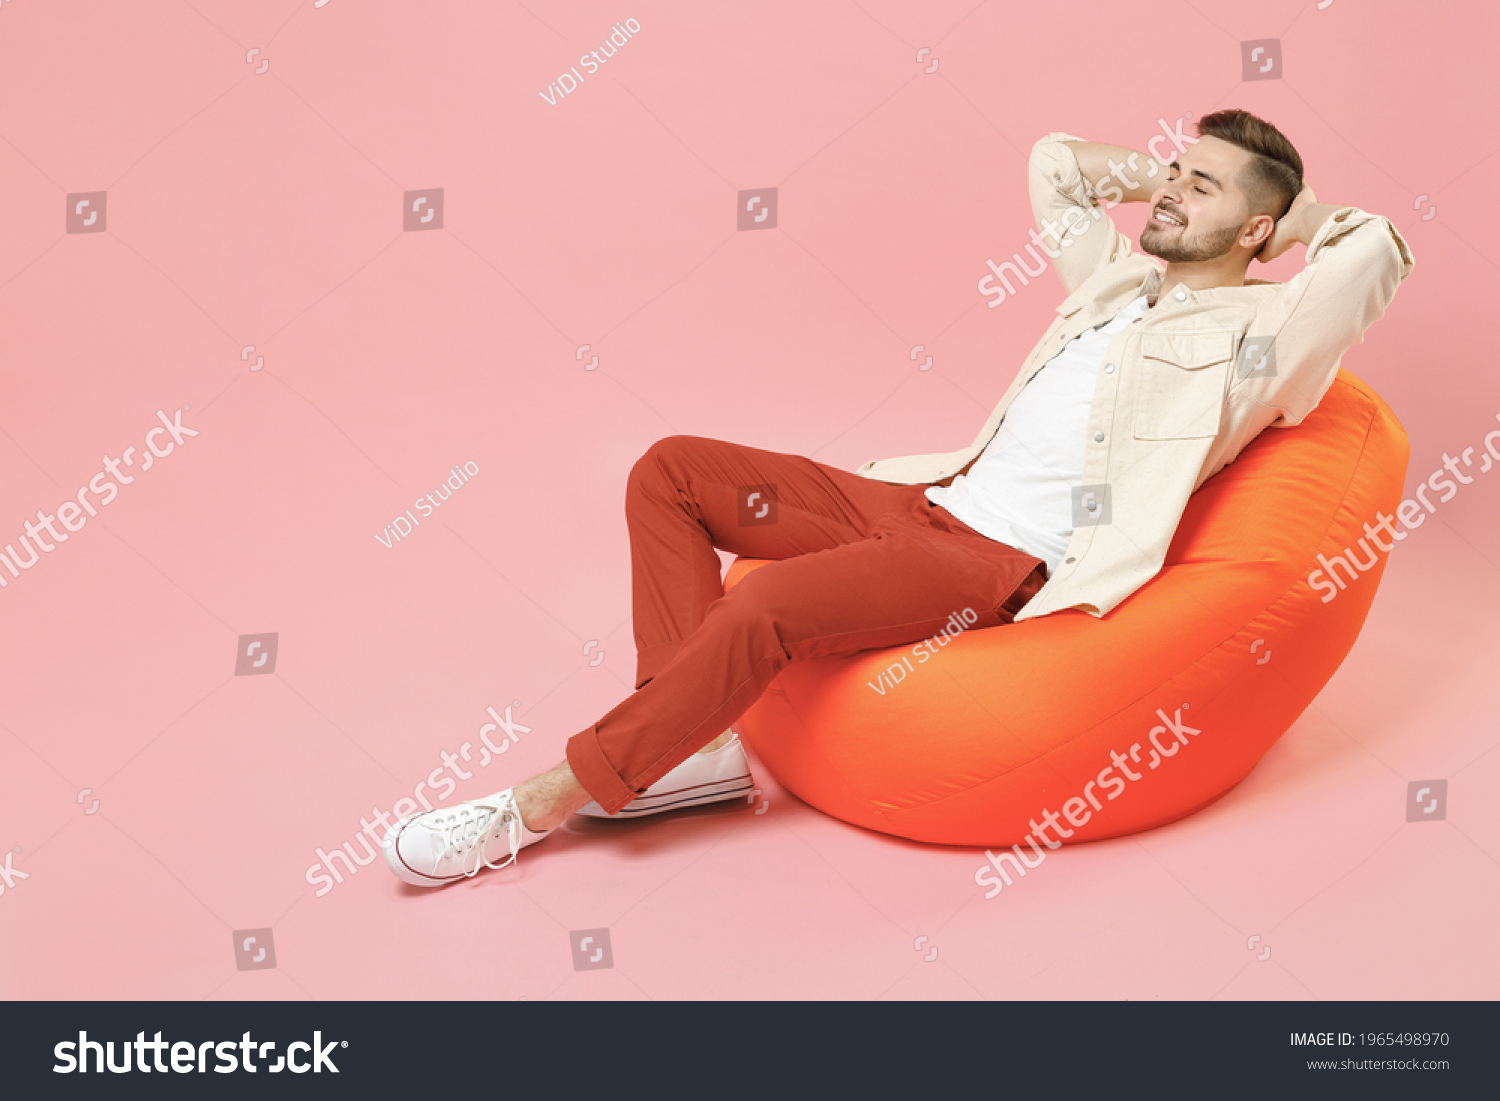 Full length young smiling happy overjoyed joyful fashionable man 20s in jacket white t-shirt sitting in bean bag chair resting hold hand behind neck isolated on pastel pink background studio portrait. #1965498970